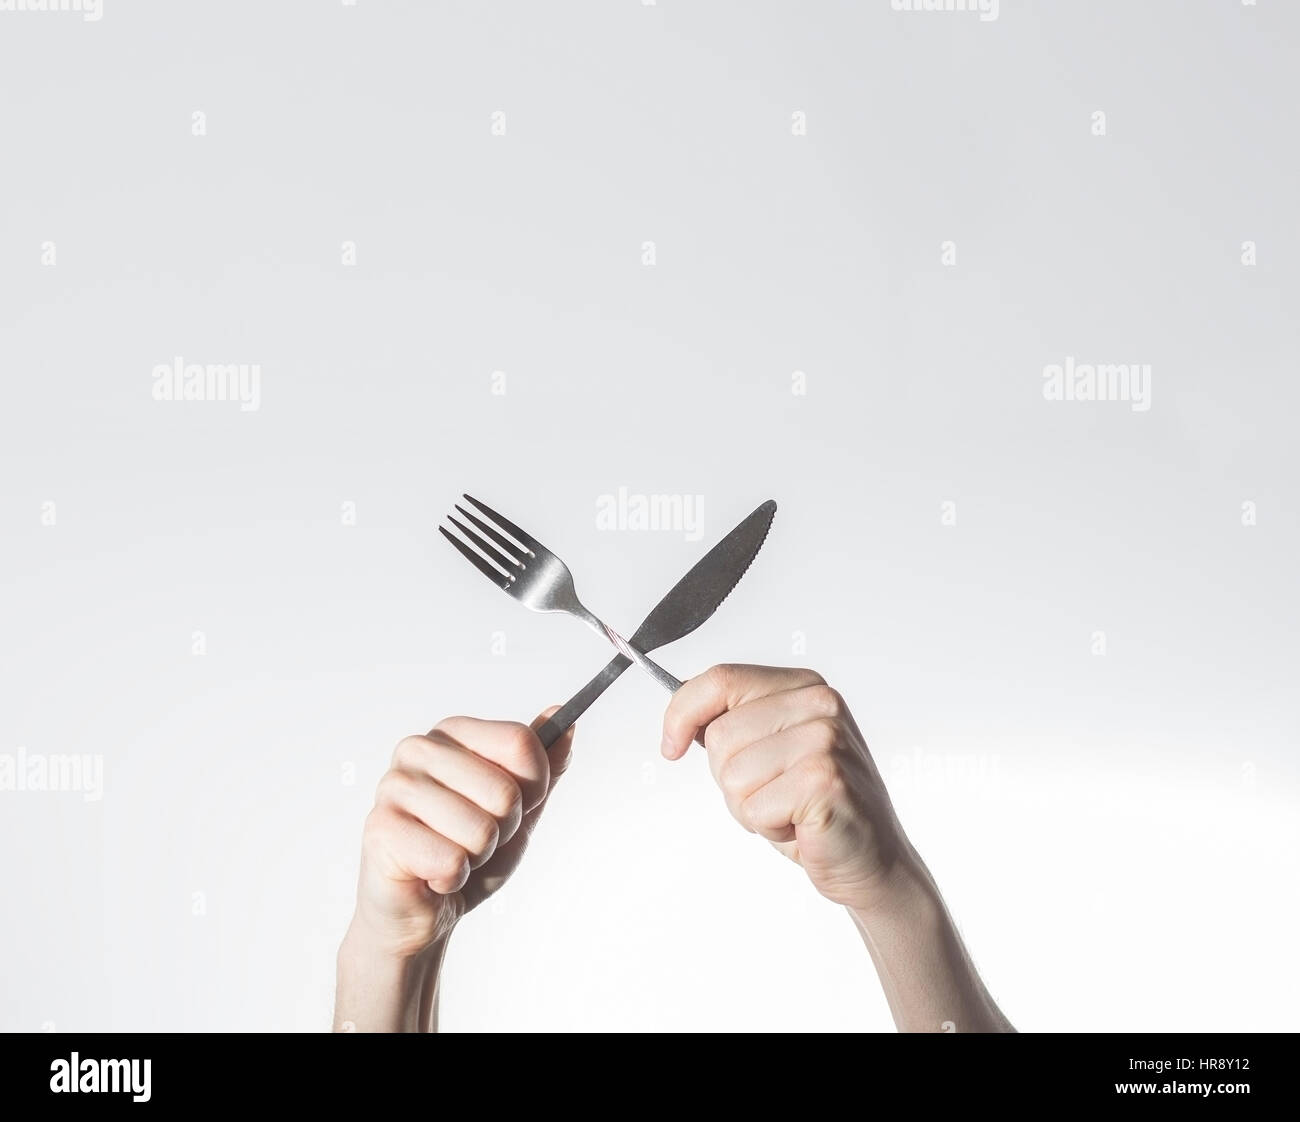 breakfast concept, hands hold knife and fork crosed,  Space for text, free space, Stock Photo